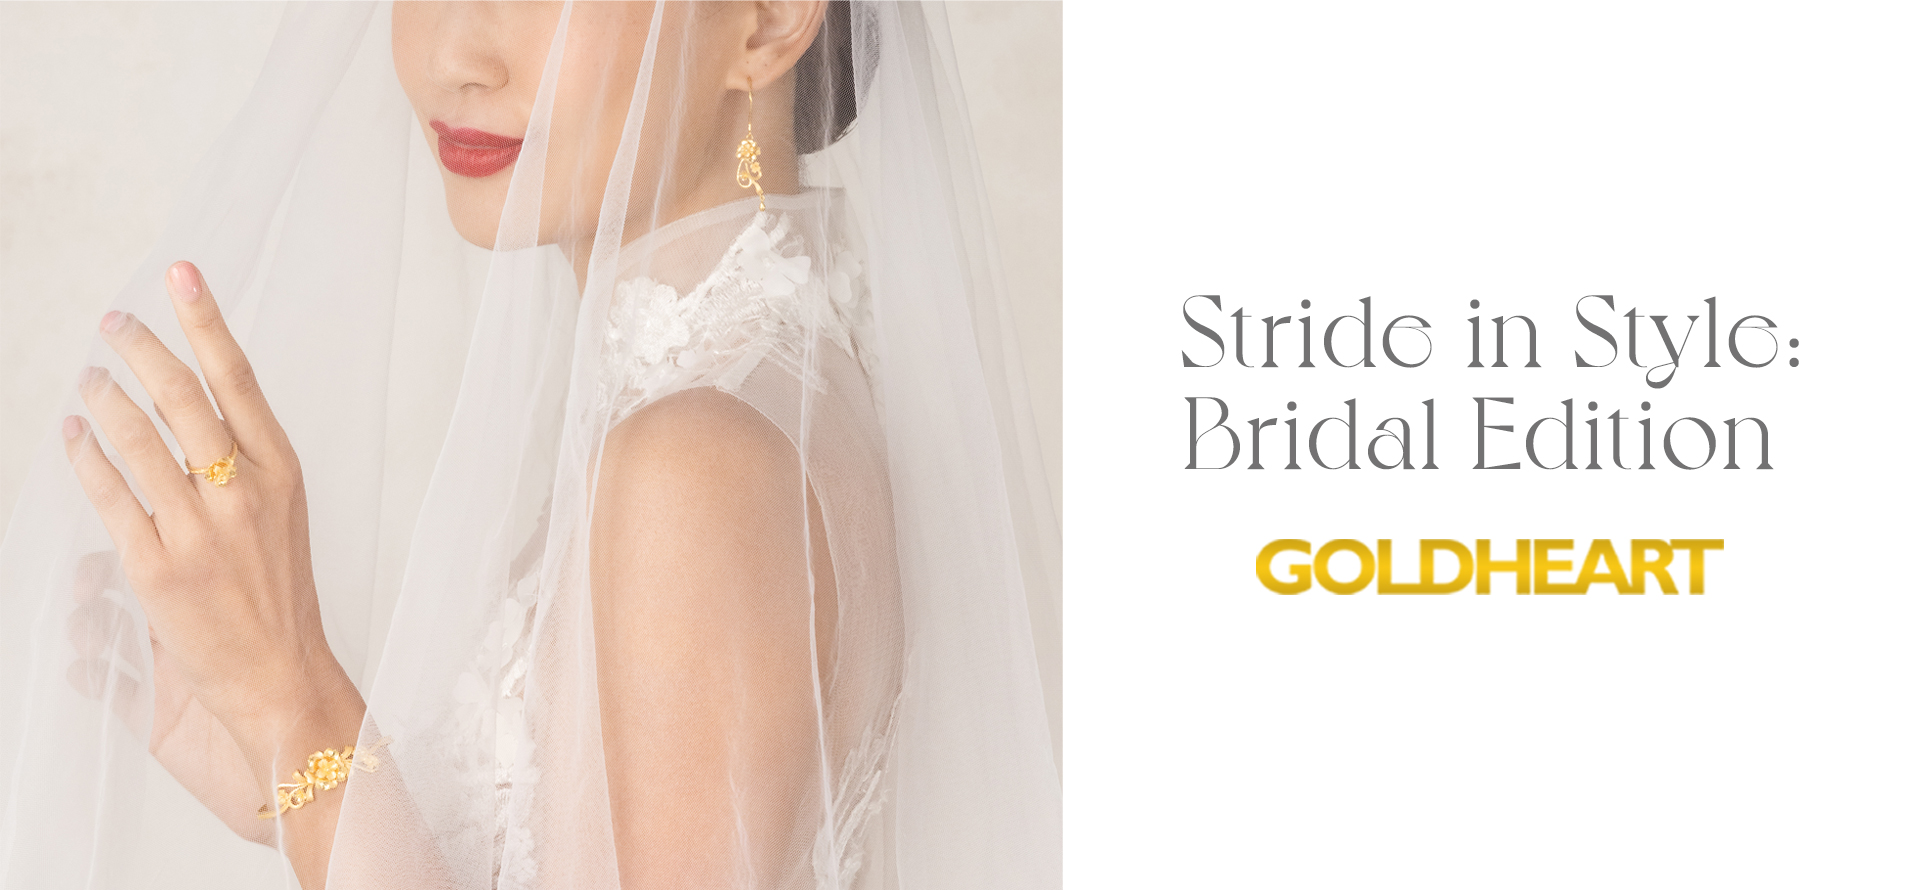 Stride in Style: Bridal Edition